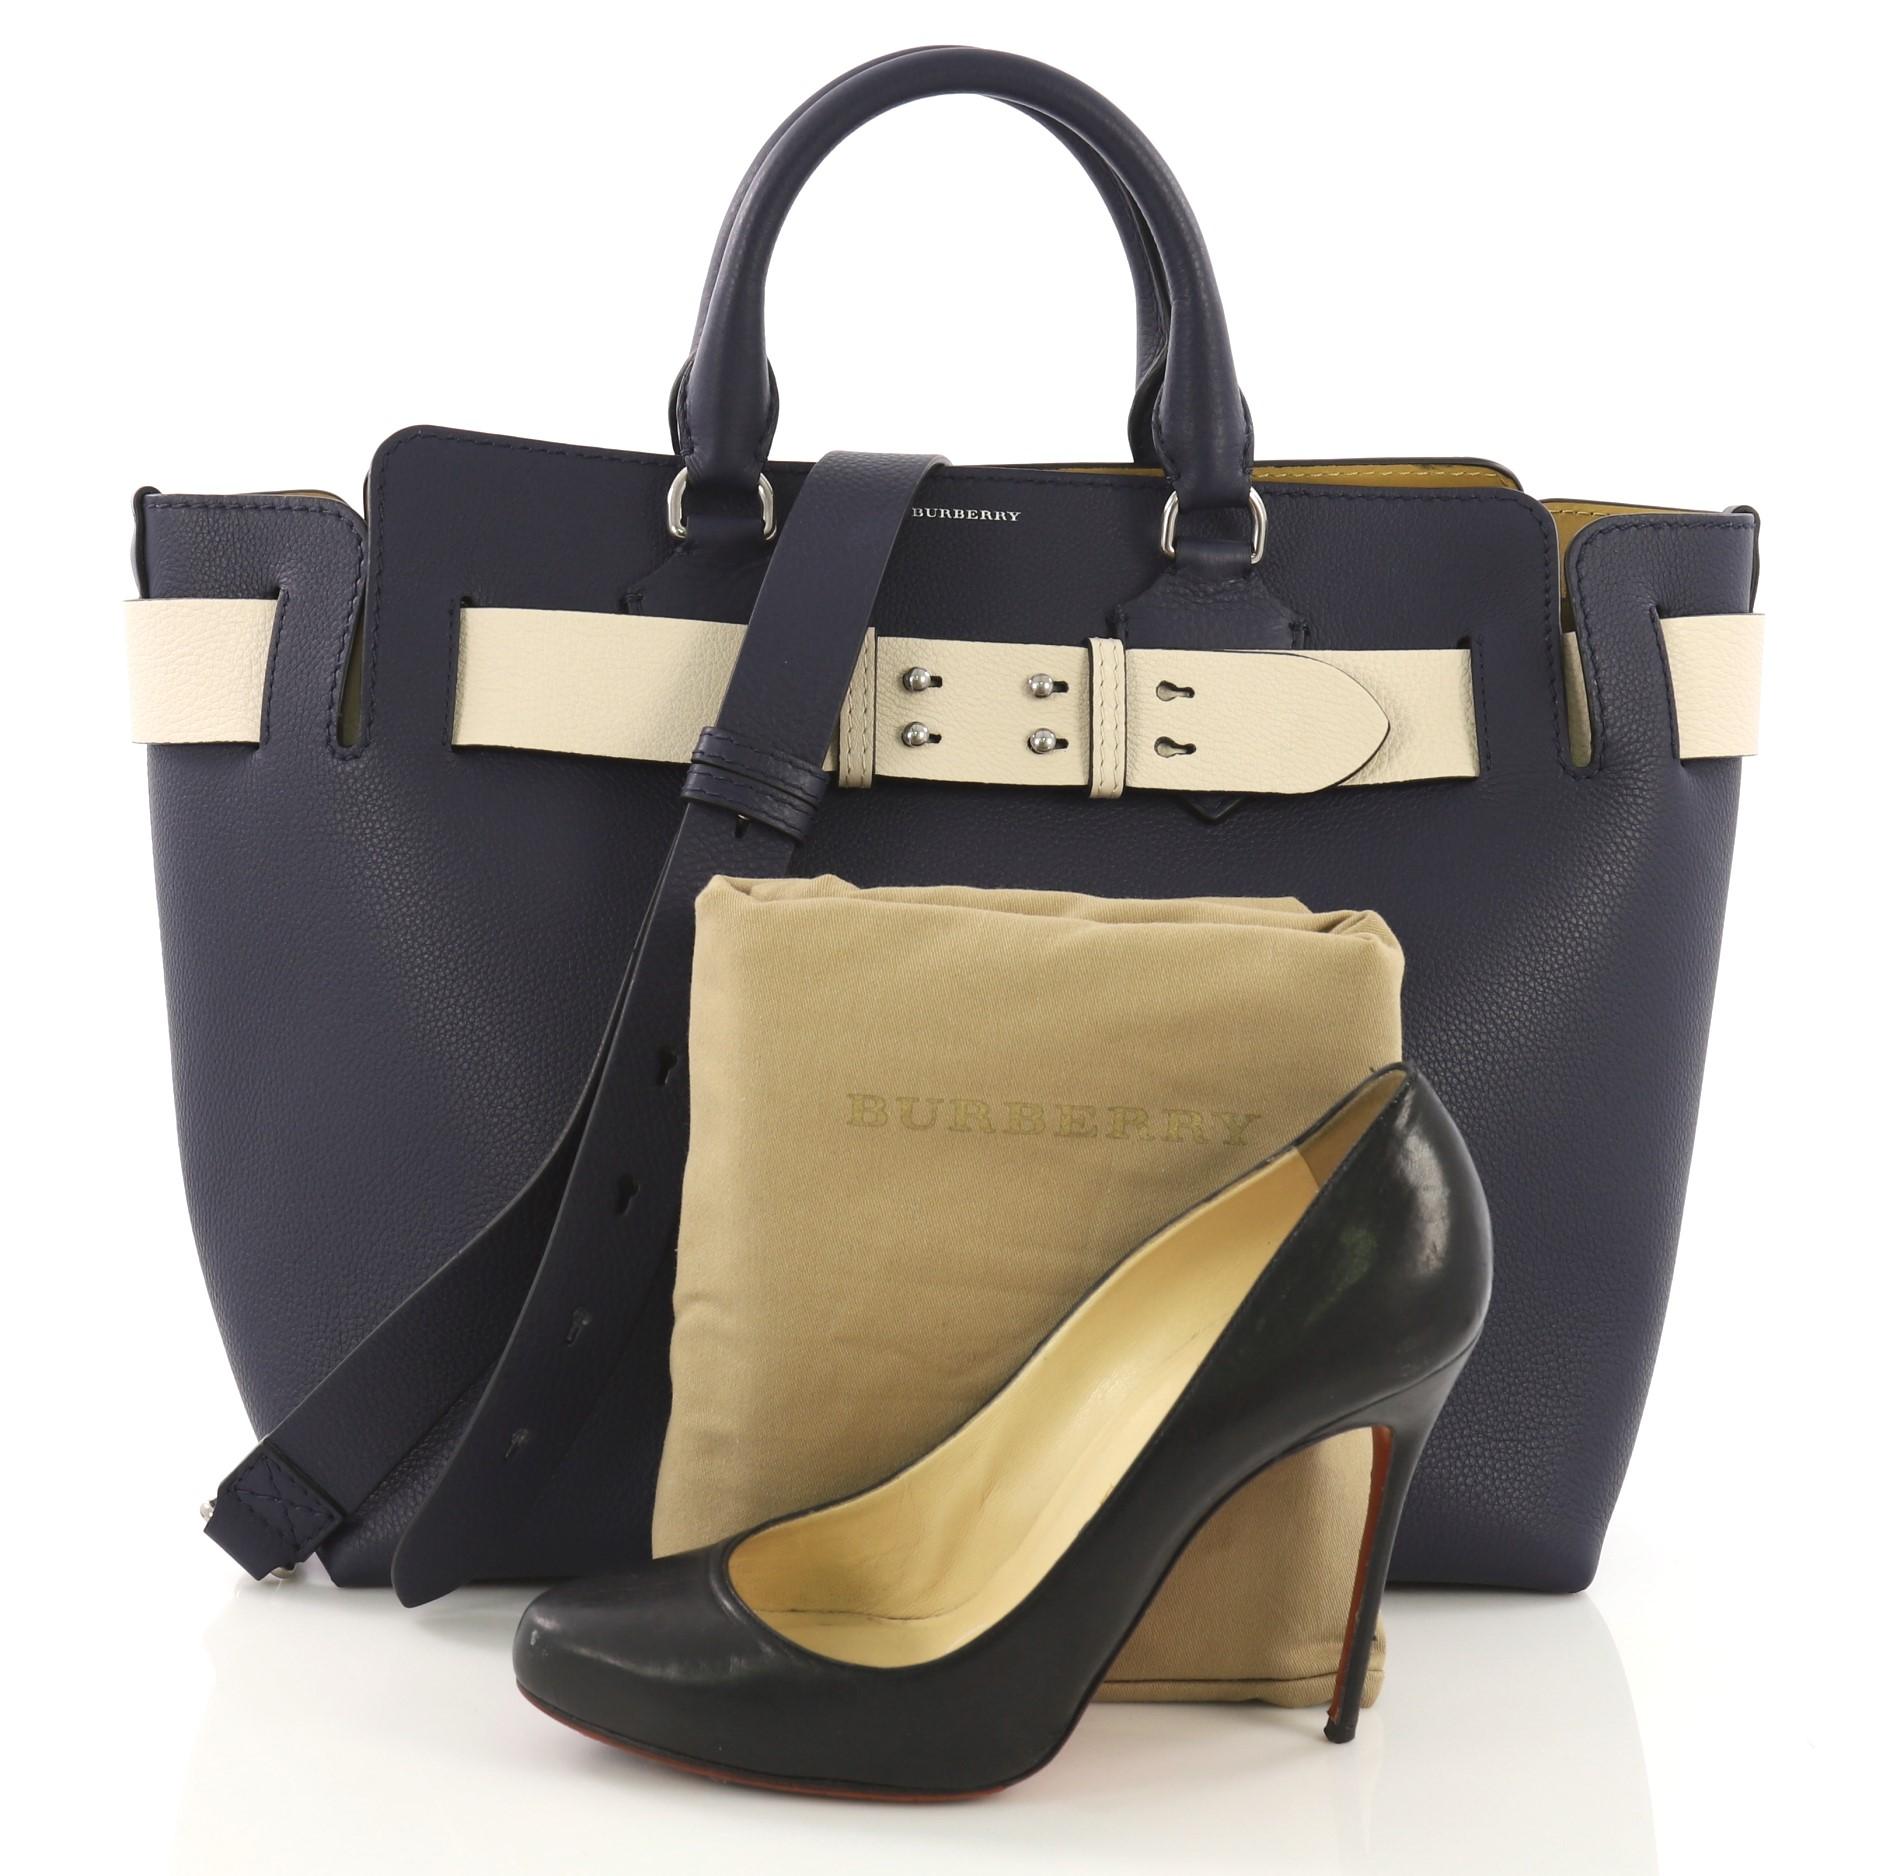 This Burberry Belt Tote Leather Medium, crafted in blue leather, features dual rolled leather handles, wide belt at the top, and silver-tone hardware. It opens to a yellow leather interior with slip pockets. **Note: Shoe photographed is used as a